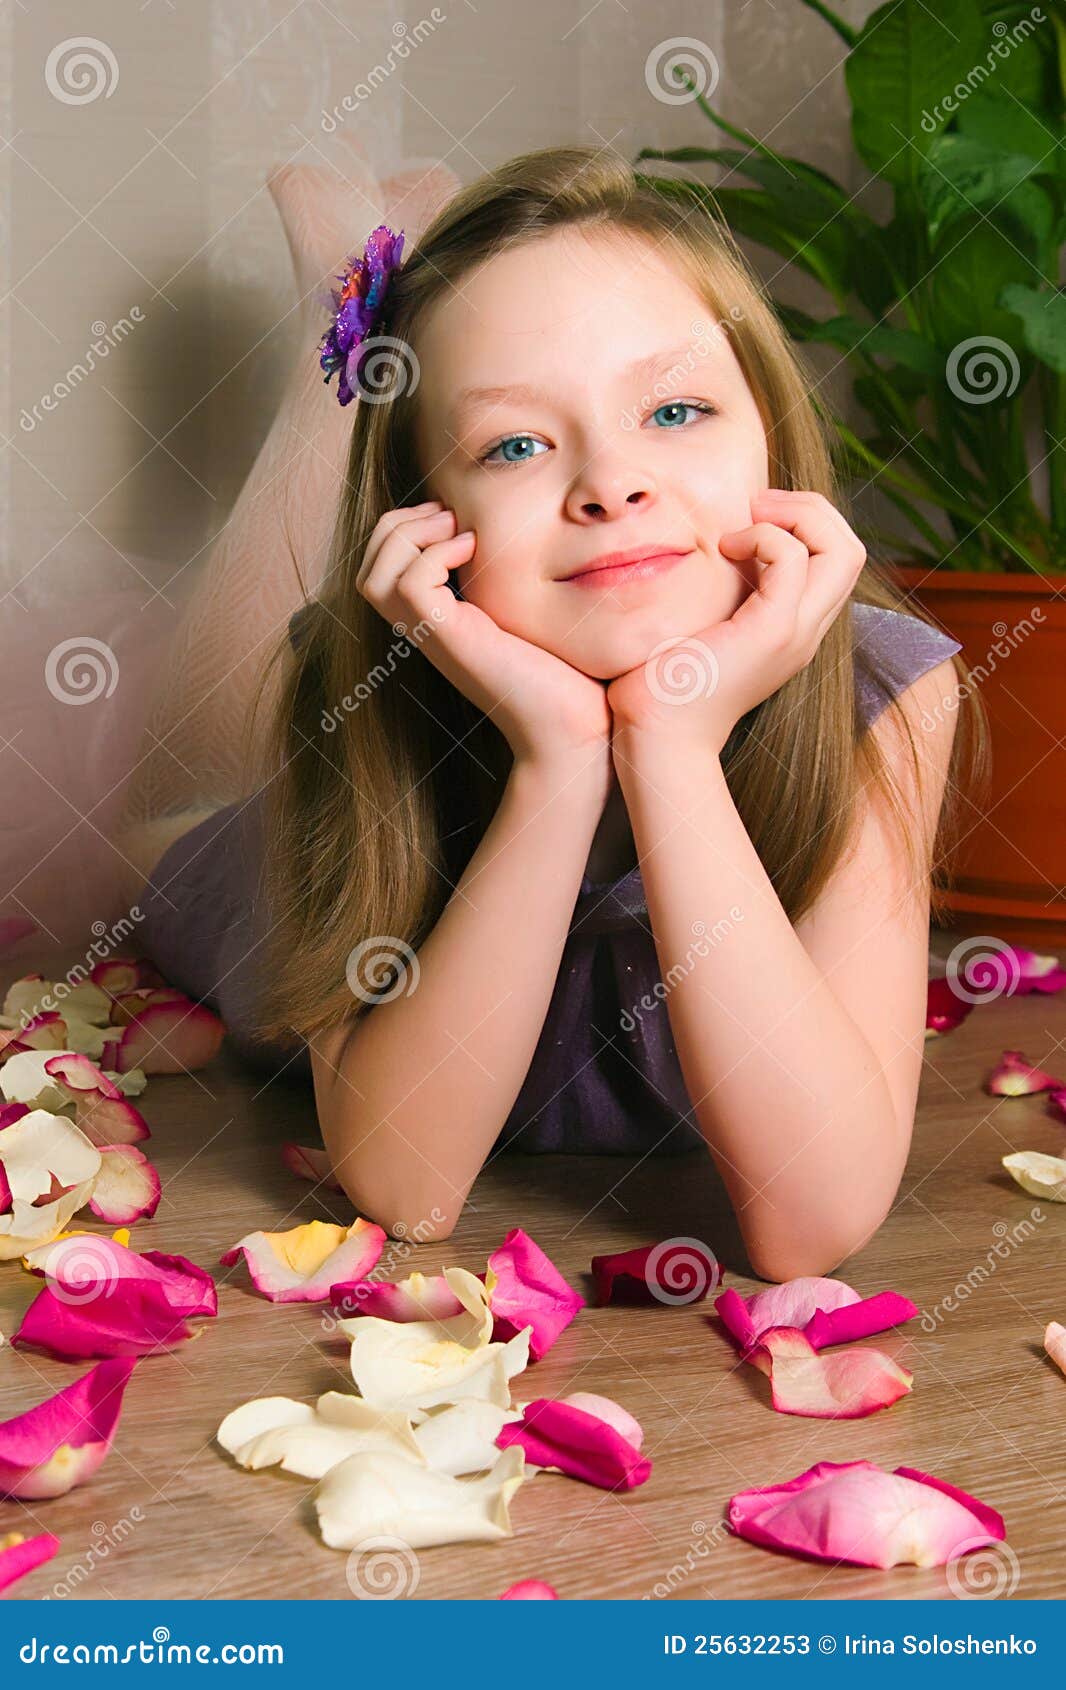 The Girl Dreams Stock Image Image Of Smile Rose Head 25632253